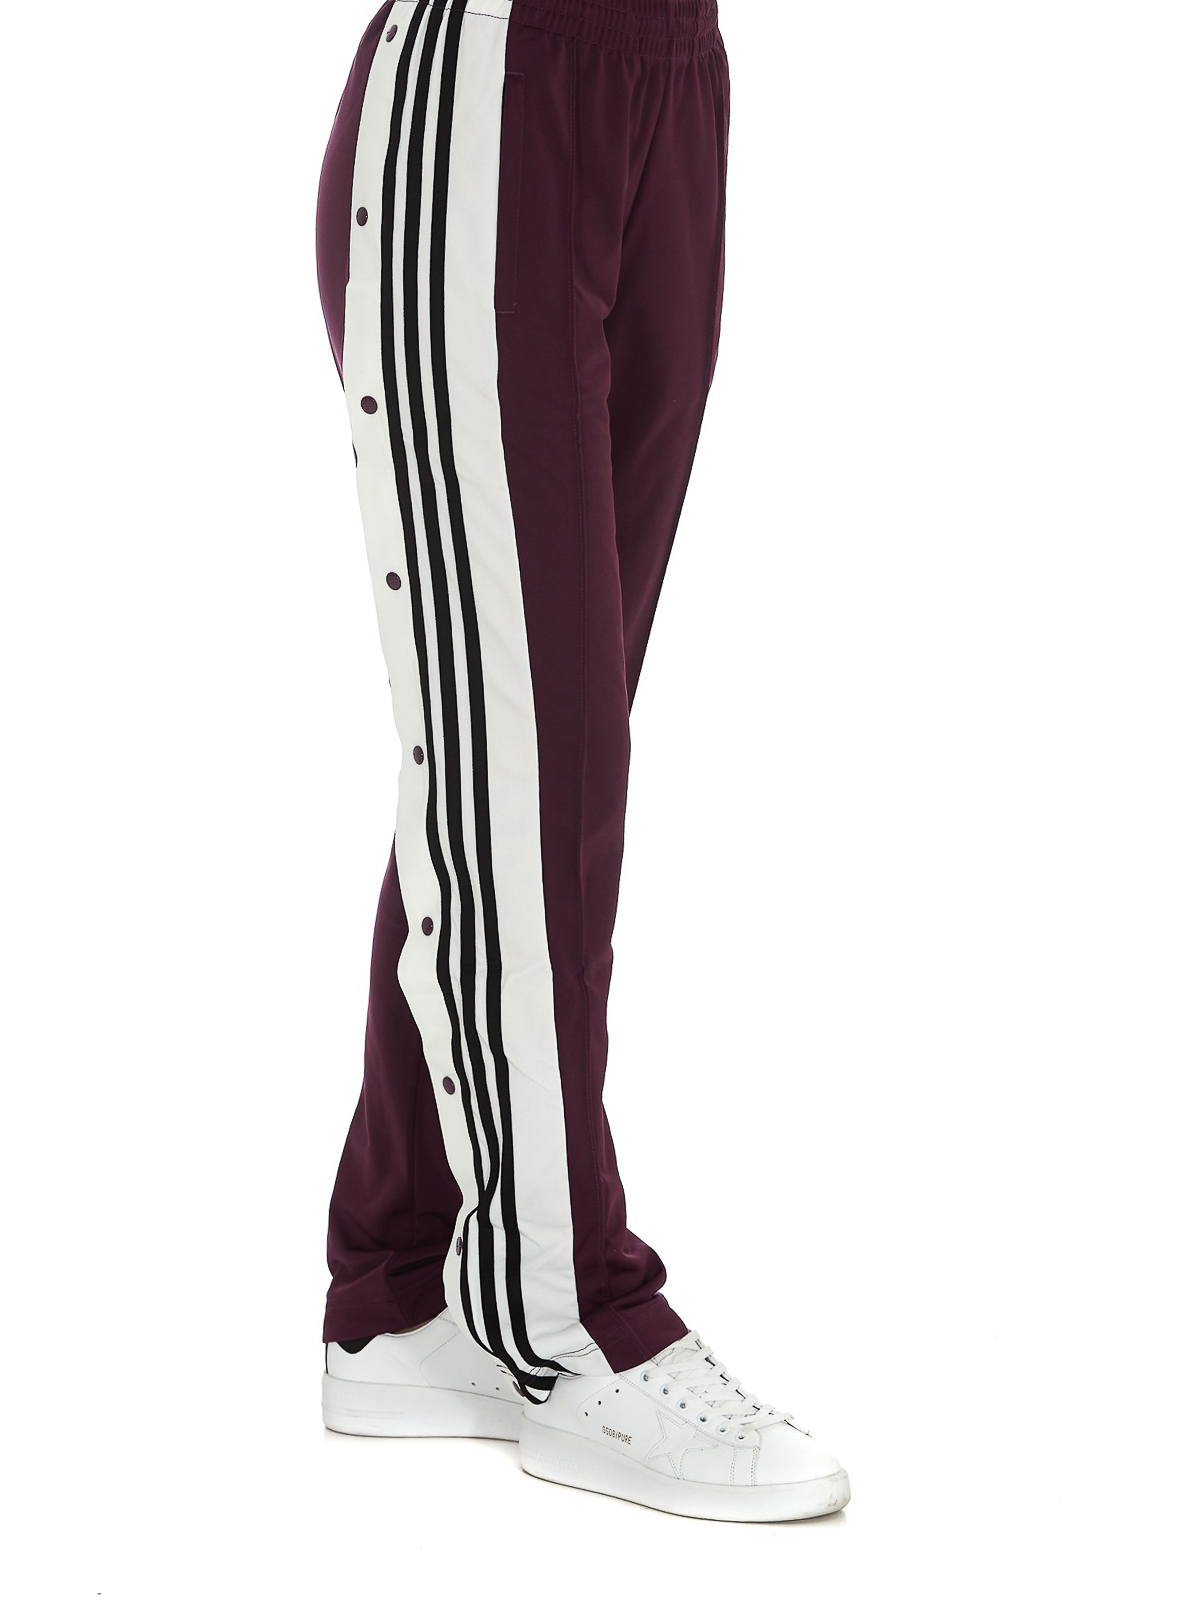 Tracksuit bottoms - Girls Are Awesome tracksuit bottoms - GU6973